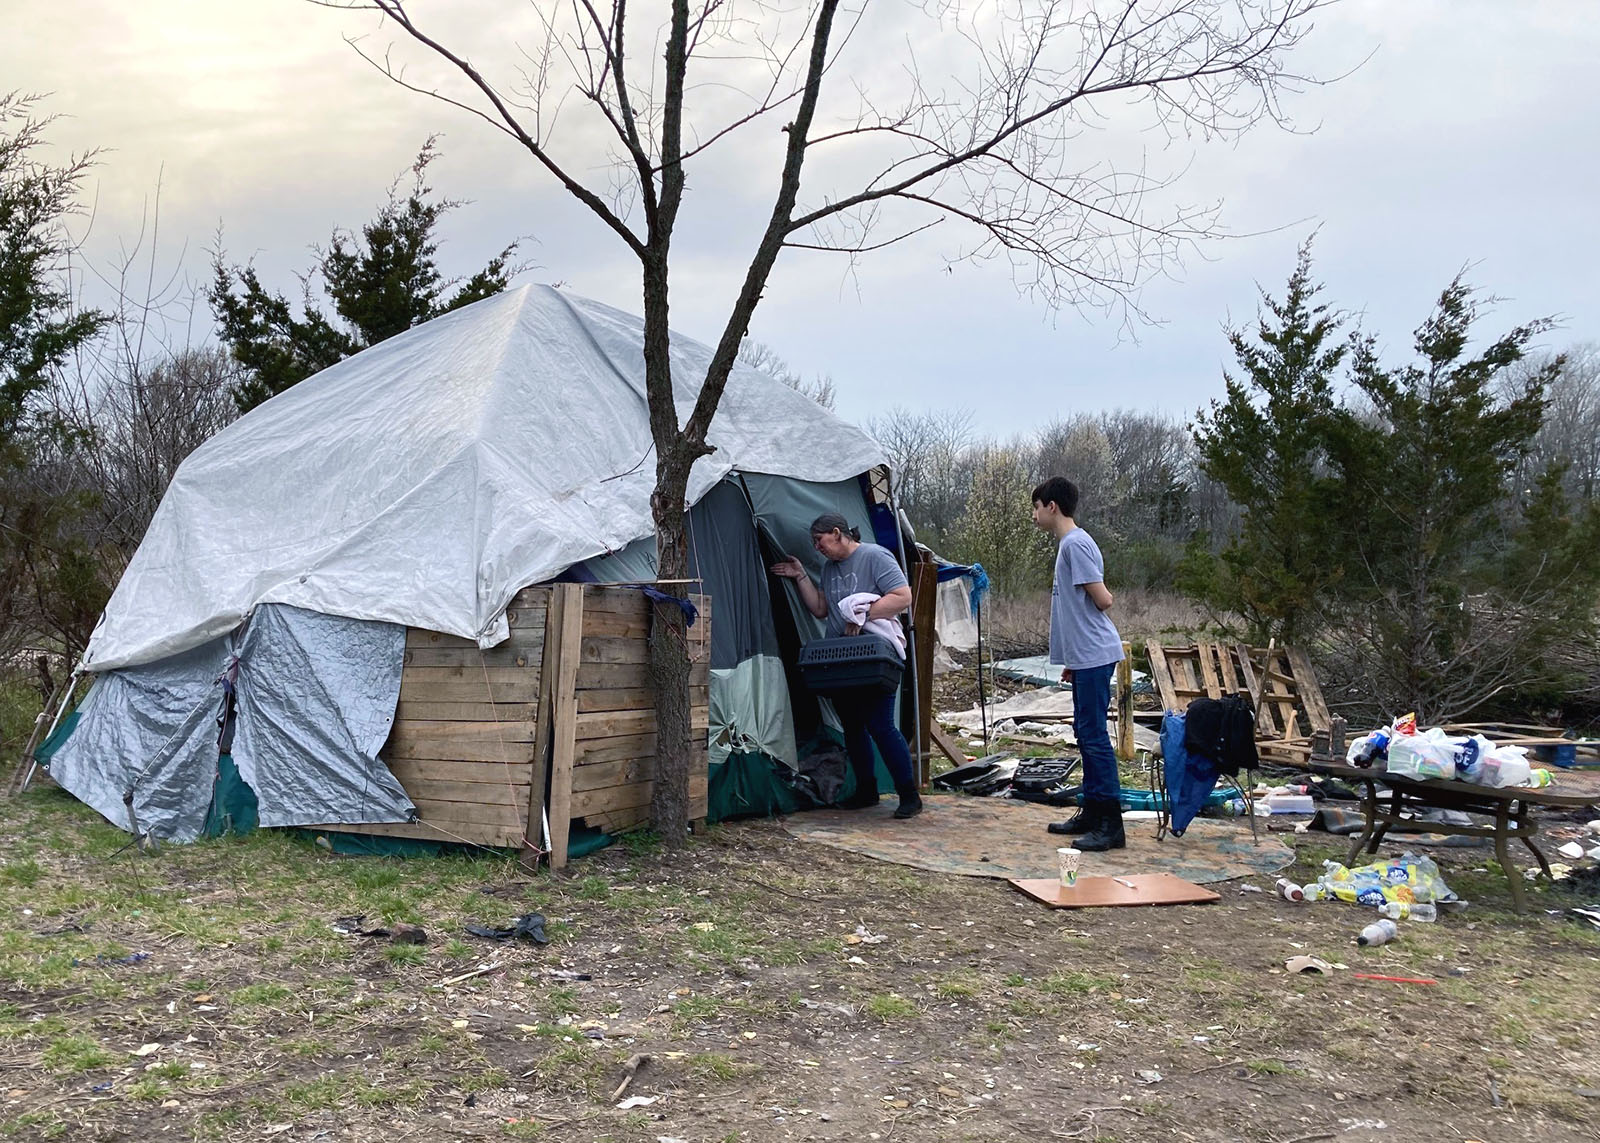 Springfield's largest homeless camp cleared; city gives campers 3 days to vacate